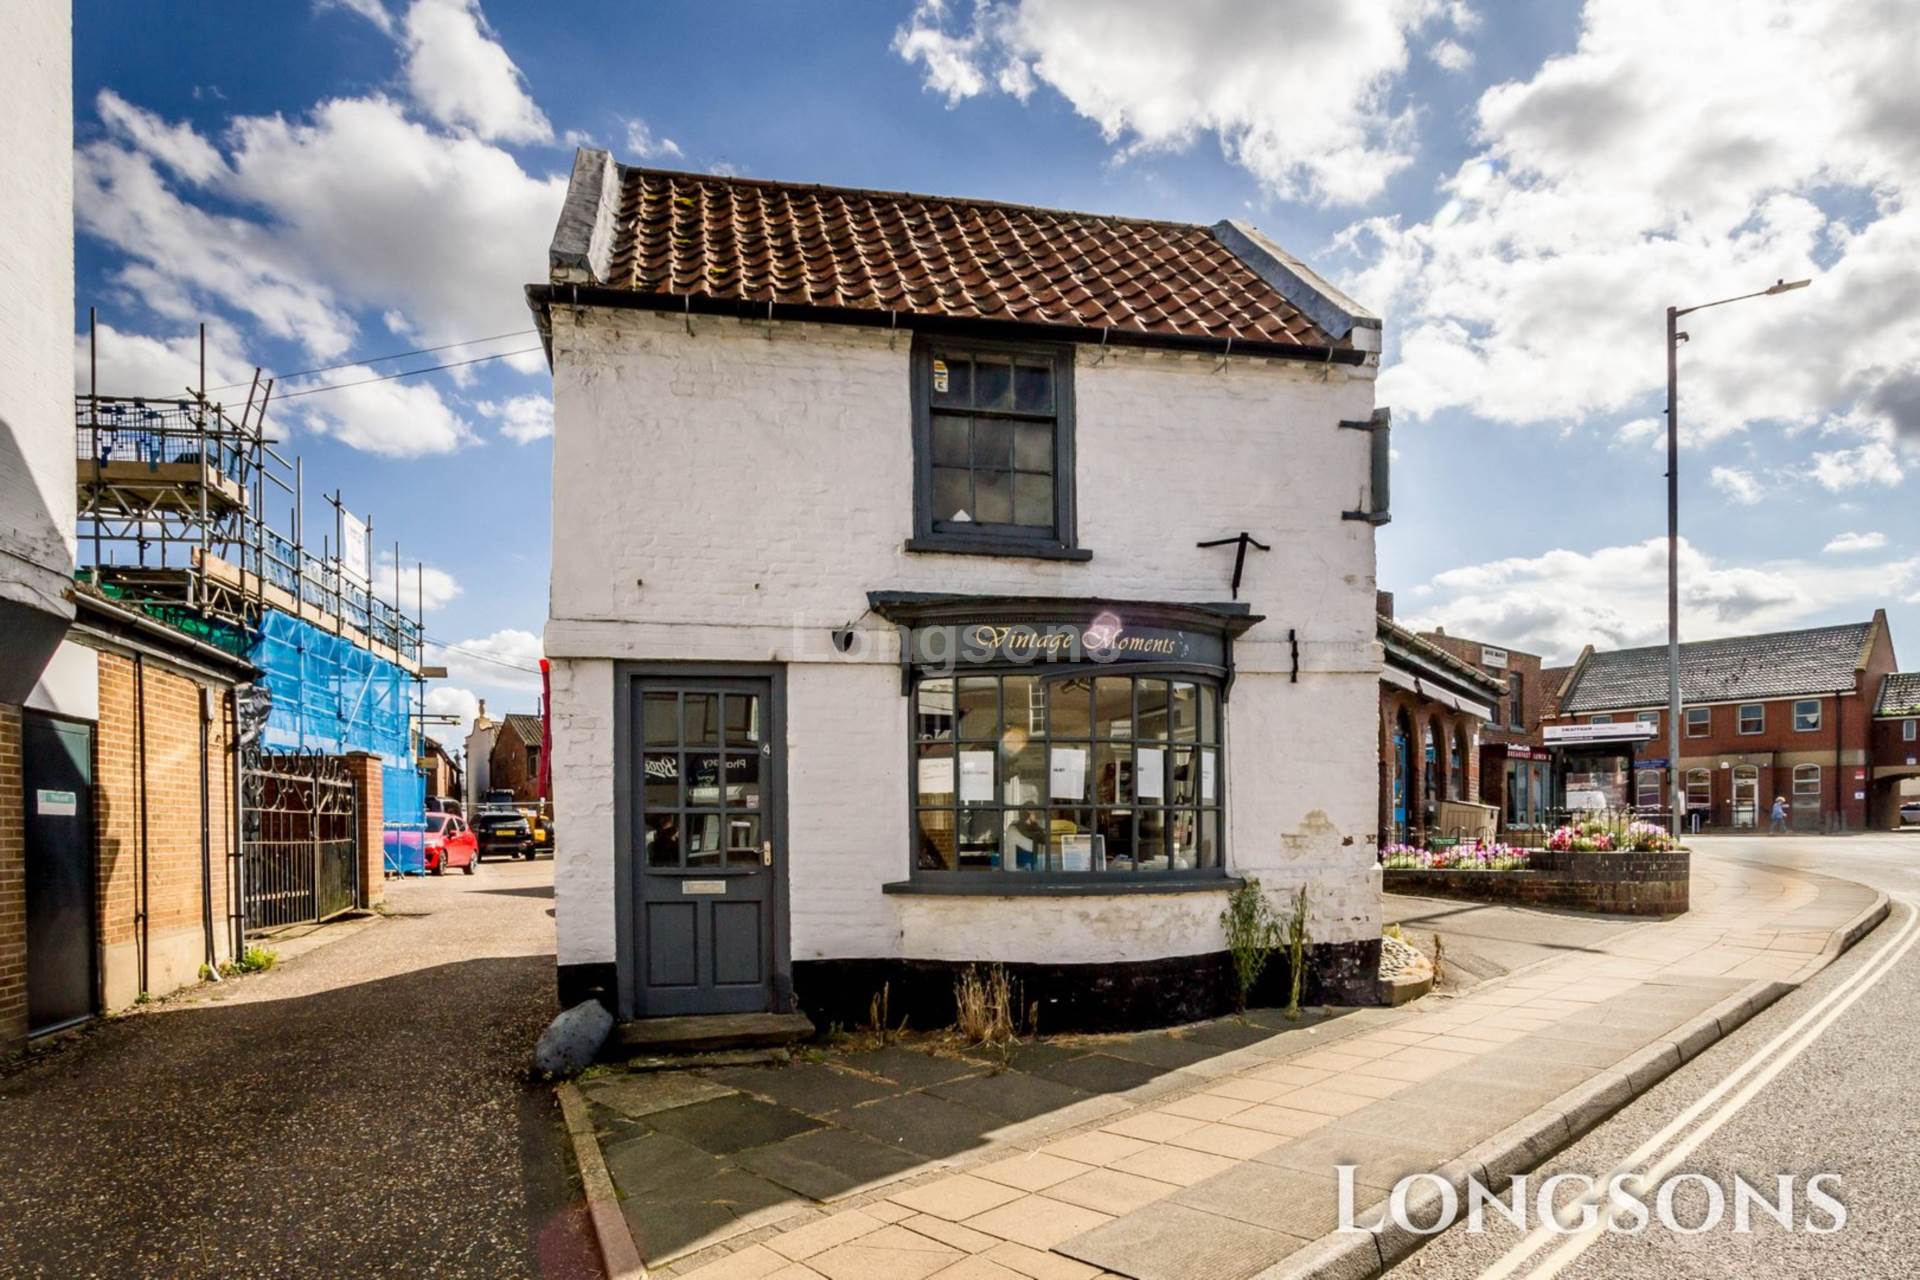 Retail Property (High Street) for rent in Swaffham. From Longsons - Swaffham